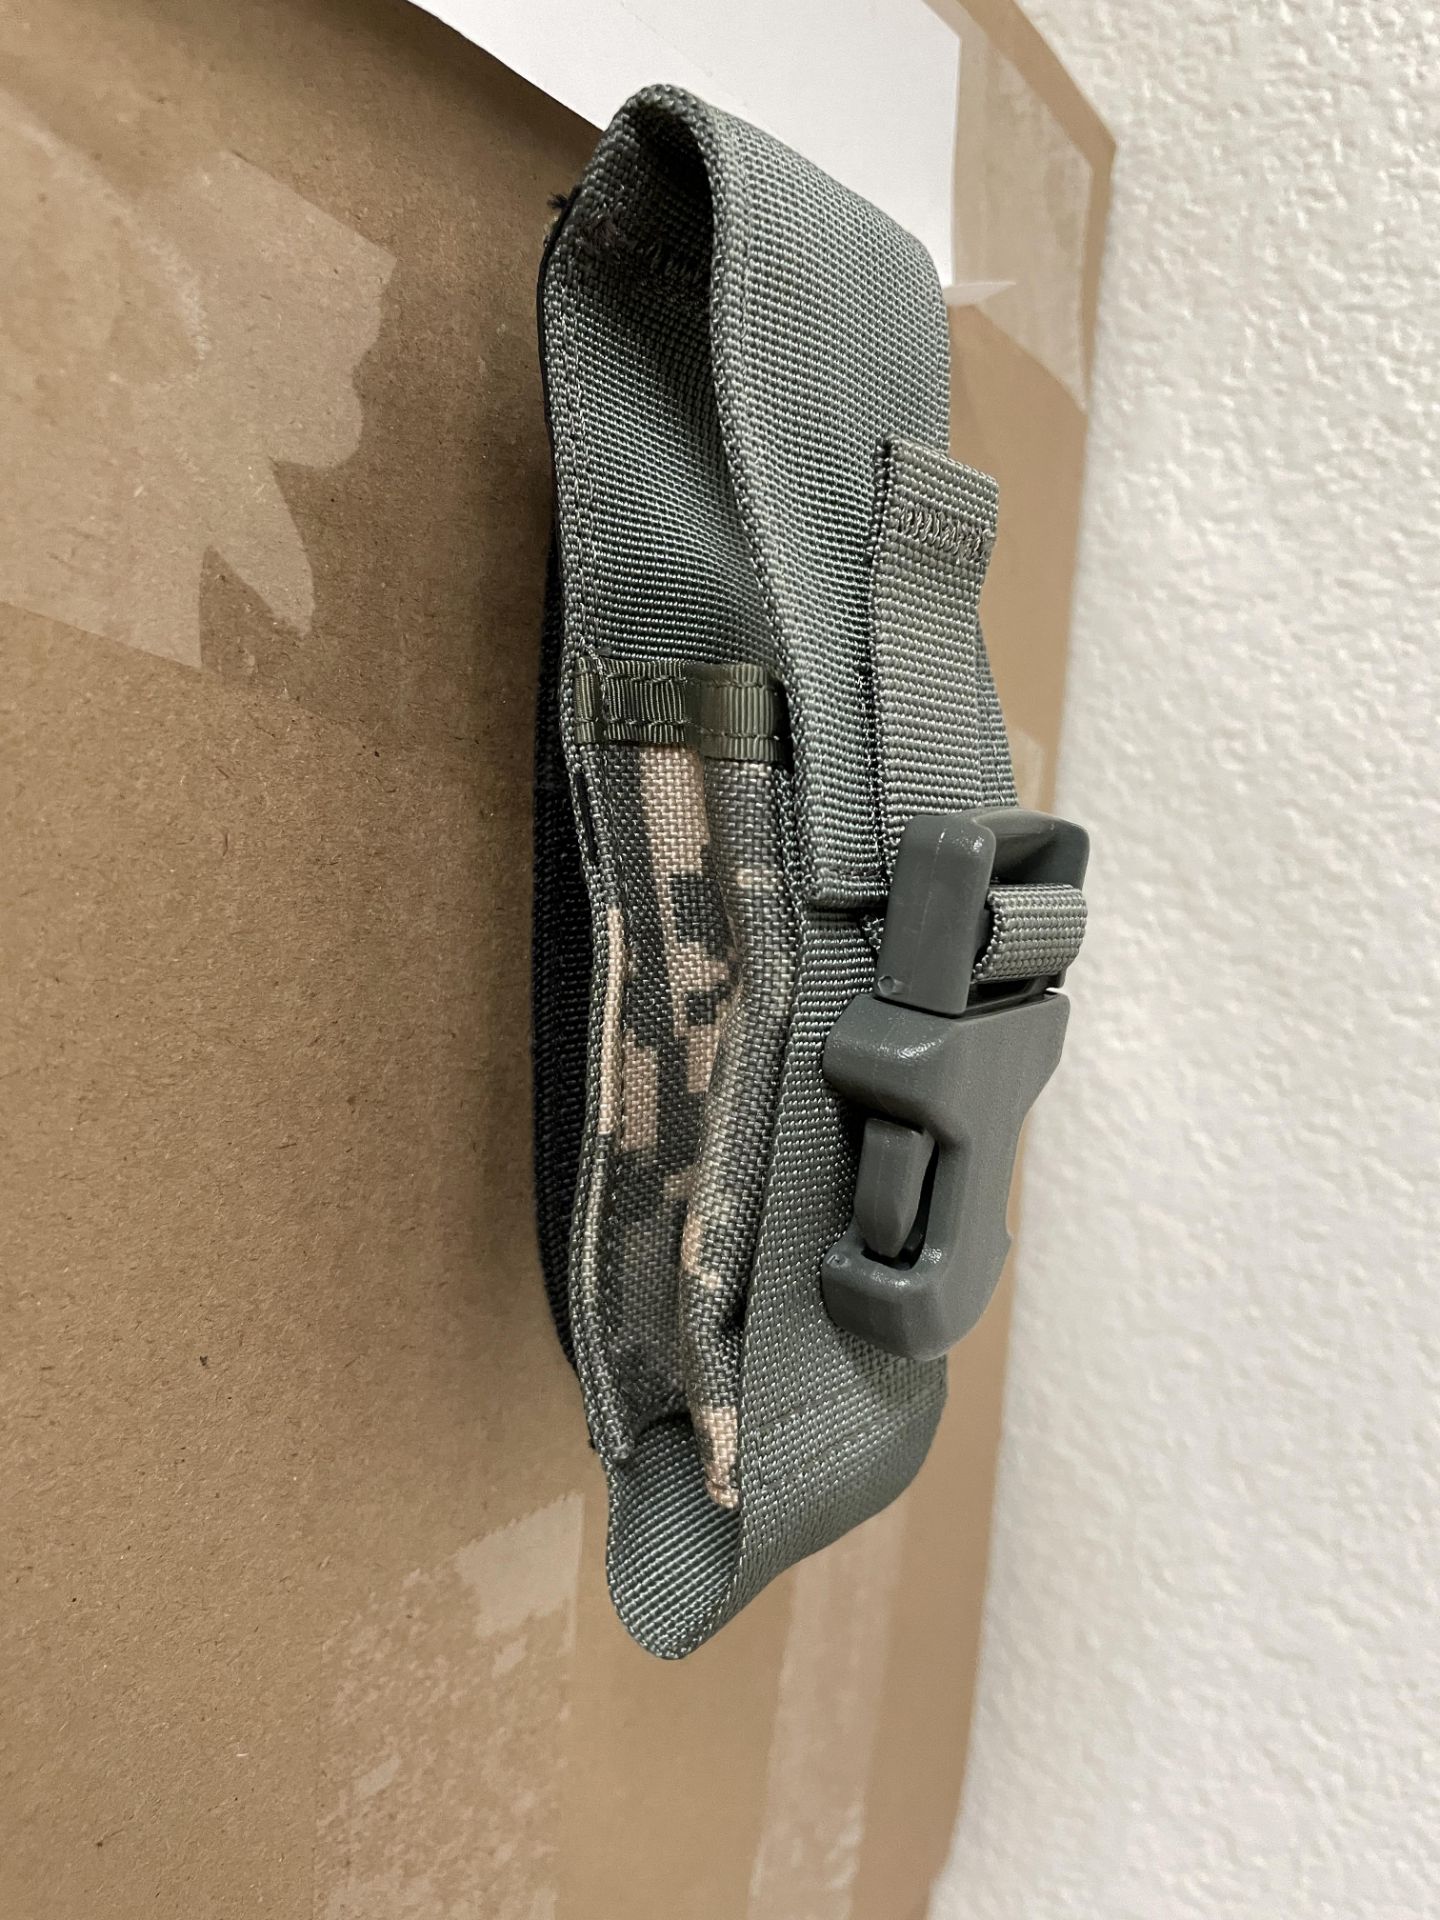 113 Blackwater Gear Grenade Pouches in Ranger Green, Tactical Gear - Image 4 of 4